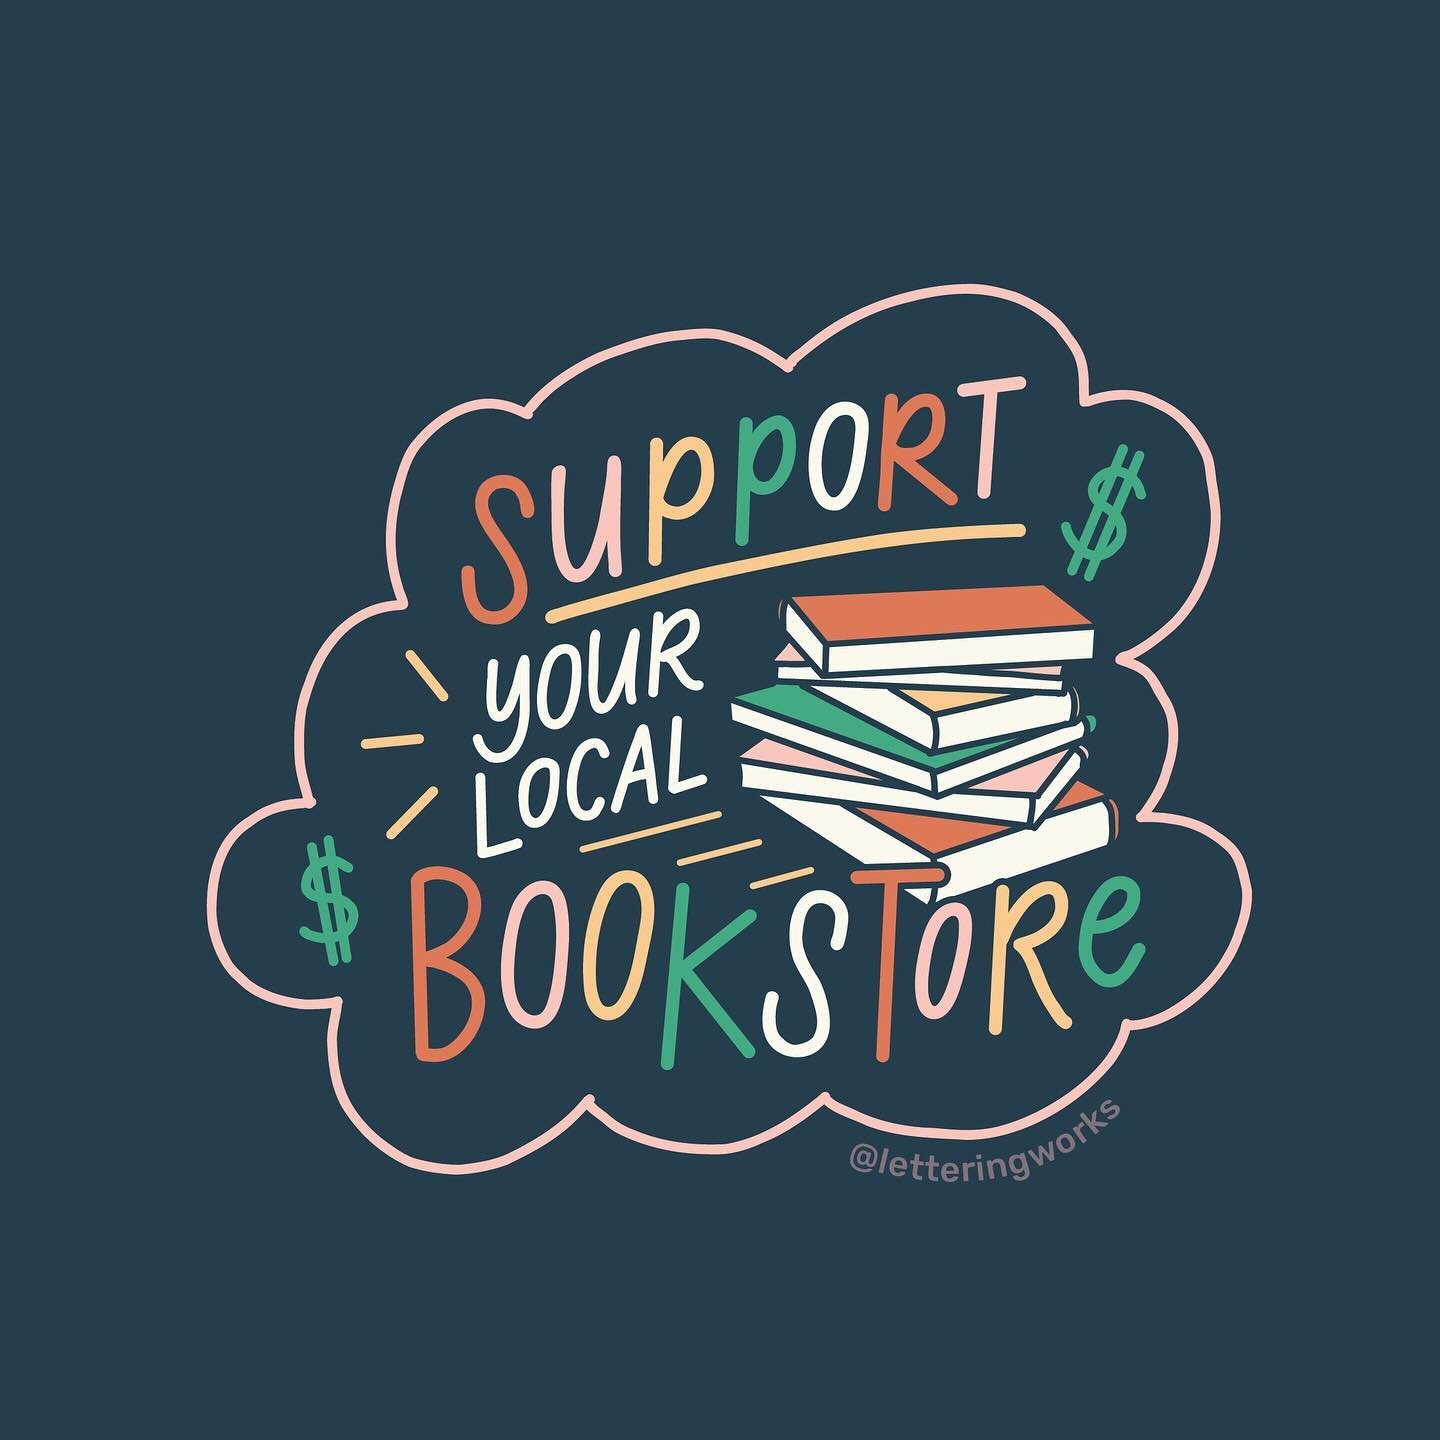 Happy Independent Bookstore Day! 📚 Tag your favorite indie bookstore and be sure to show them some love today and always 💖

I went from dreading reading as a student to discovering a true love for reading in recent years. Audiobooks are my jam righ